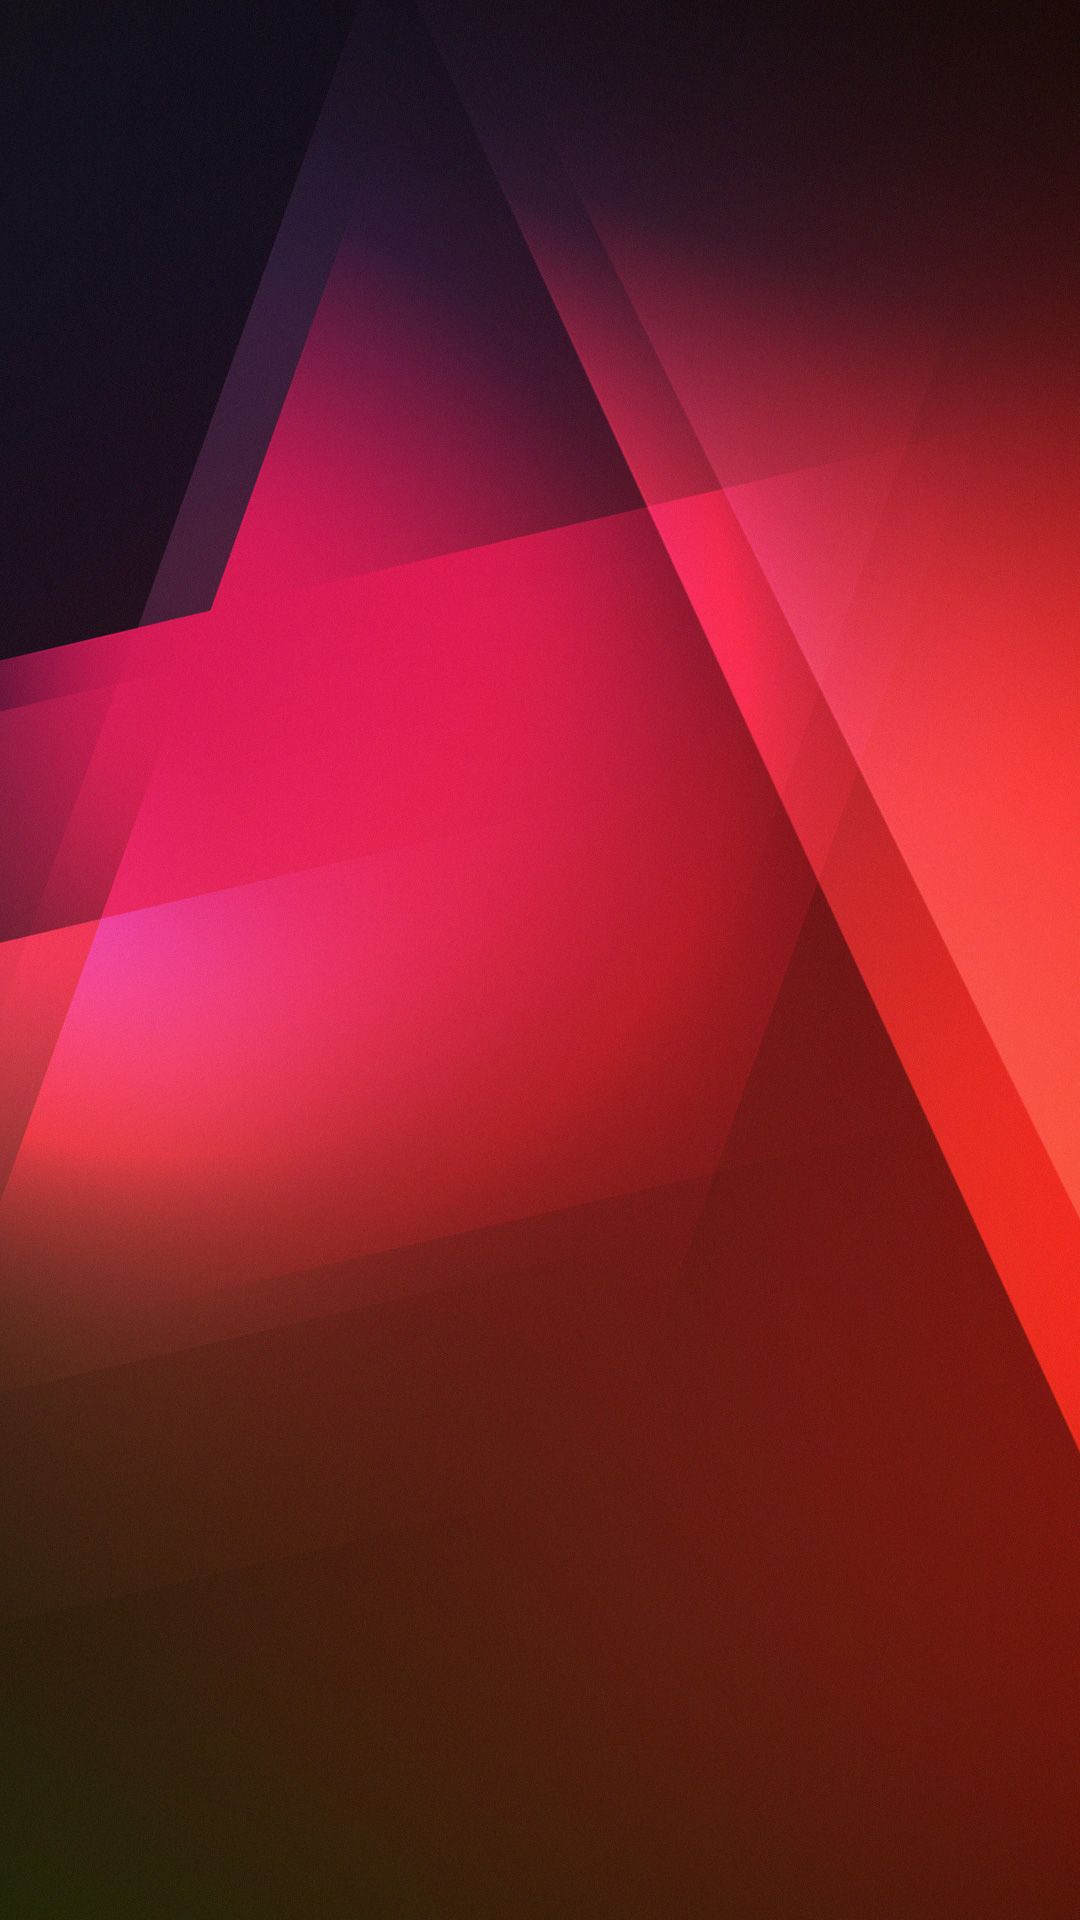 Abstract Geometric Red Background #iPhone #plus #Wallpaper. Htc wallpaper, Red wallpaper, Red background image